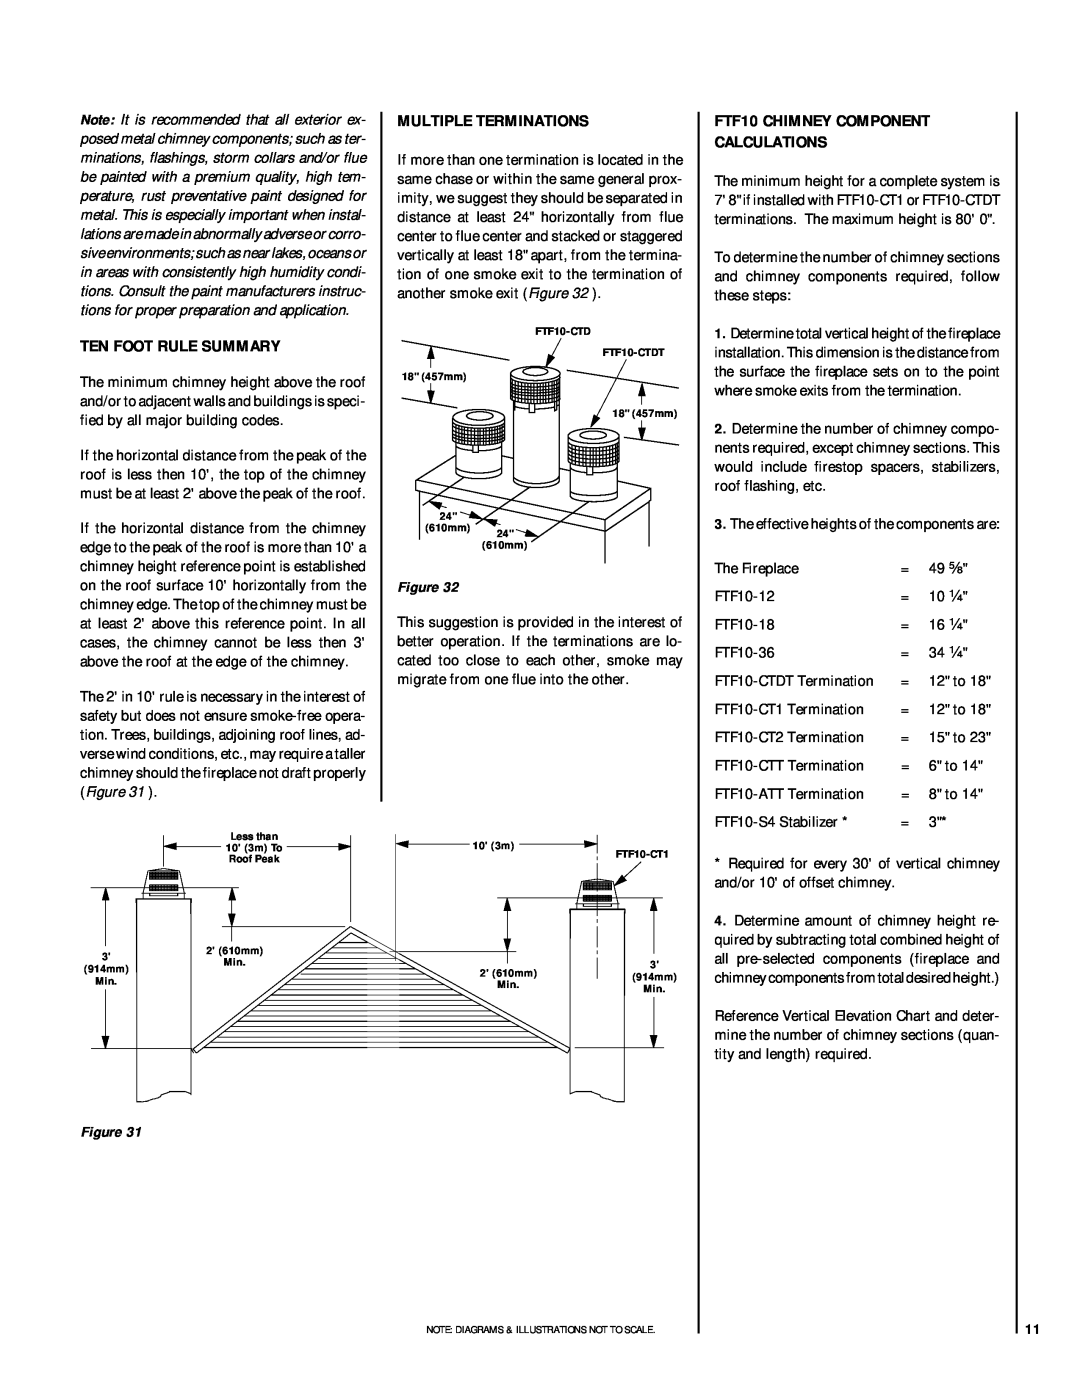 Lennox Hearth LSO-43 Multiple Terminations, Ten Foot Rule Summary, FTF10 CHIMNEY COMPONENT CALCULATIONS 